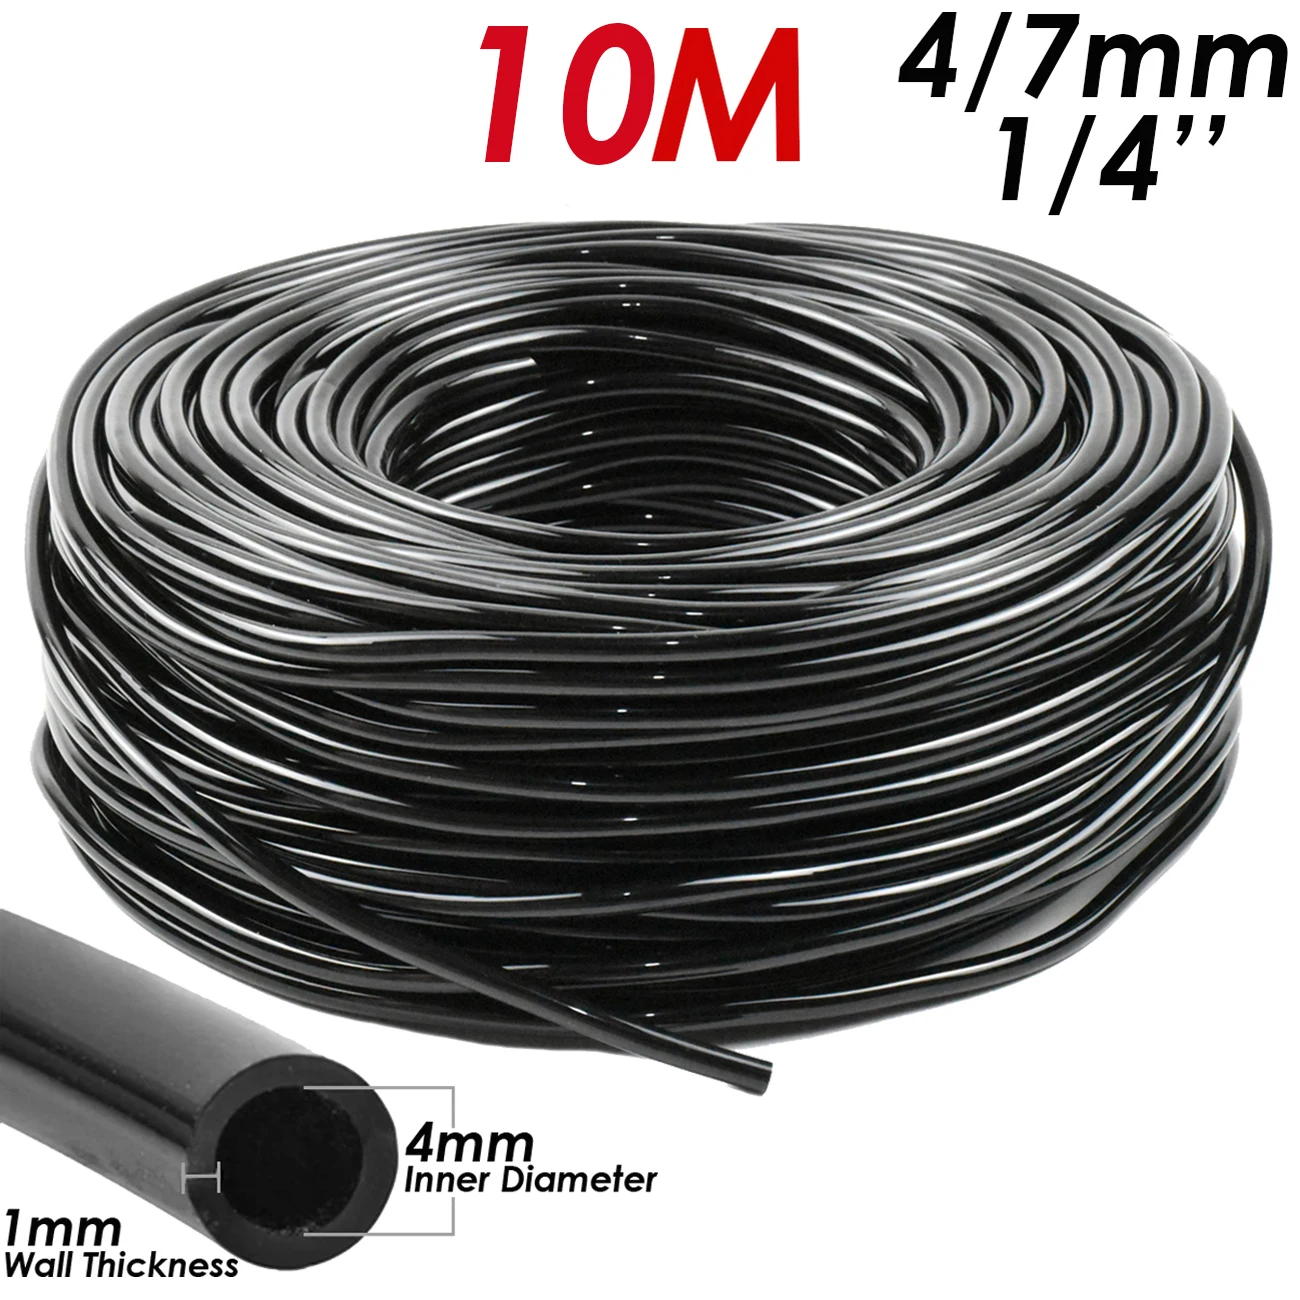 KESLA 10m-30m Garden Watering Hose Irrigation 4/7mm Pipe w/ Hole punchers fit Drip Irriagtion System Kit Greenhouses Balcony